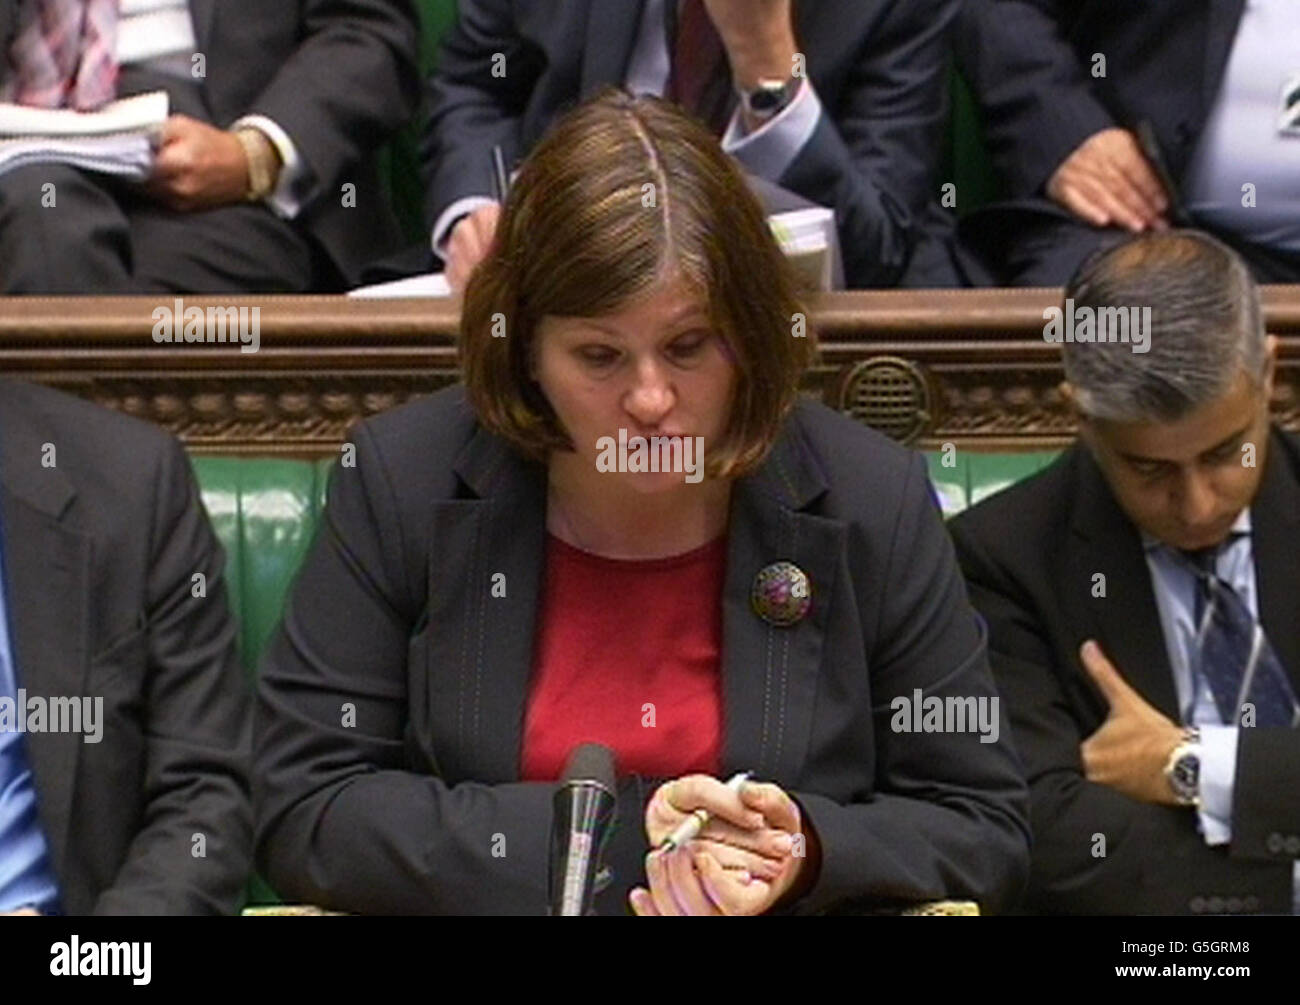 Shadow Attorney General Emily Thornberry makes a statement following an announcement by the Attorney General, Dominic Grieve QC in the House of Commons, London, where he paved the way for a fresh inquest to be held into the deaths of 96 fans in the Hillsborough disaster 23 years ago. Stock Photo